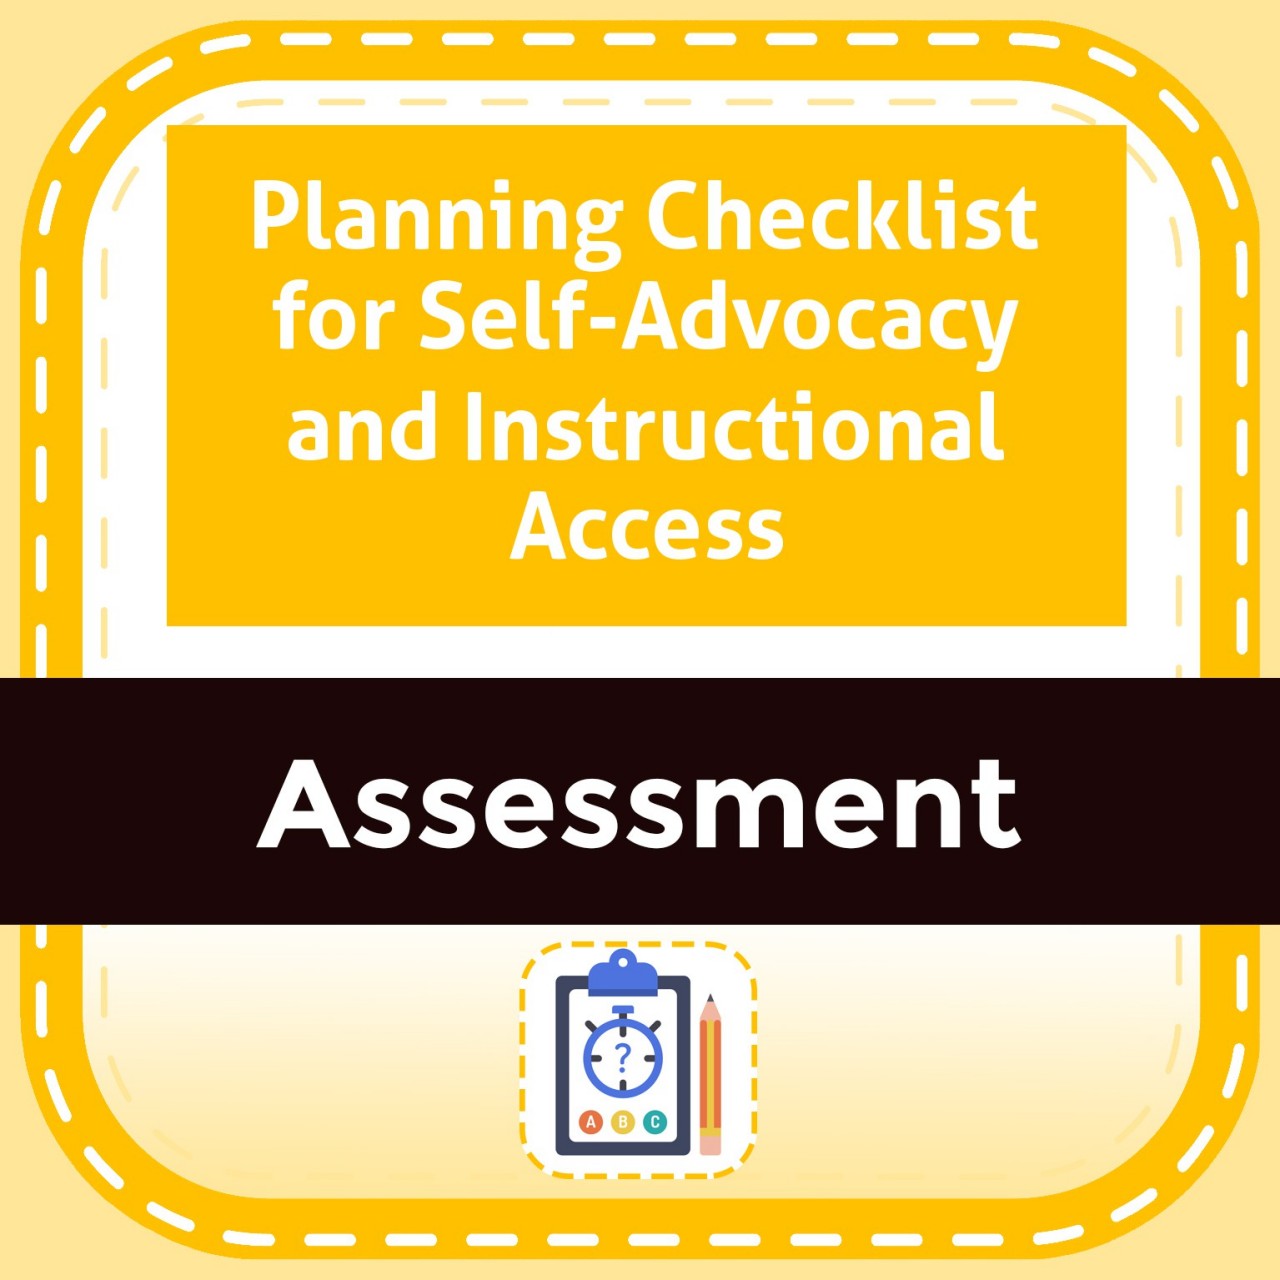 Planning Checklist for Self-Advocacy and Instructional Access